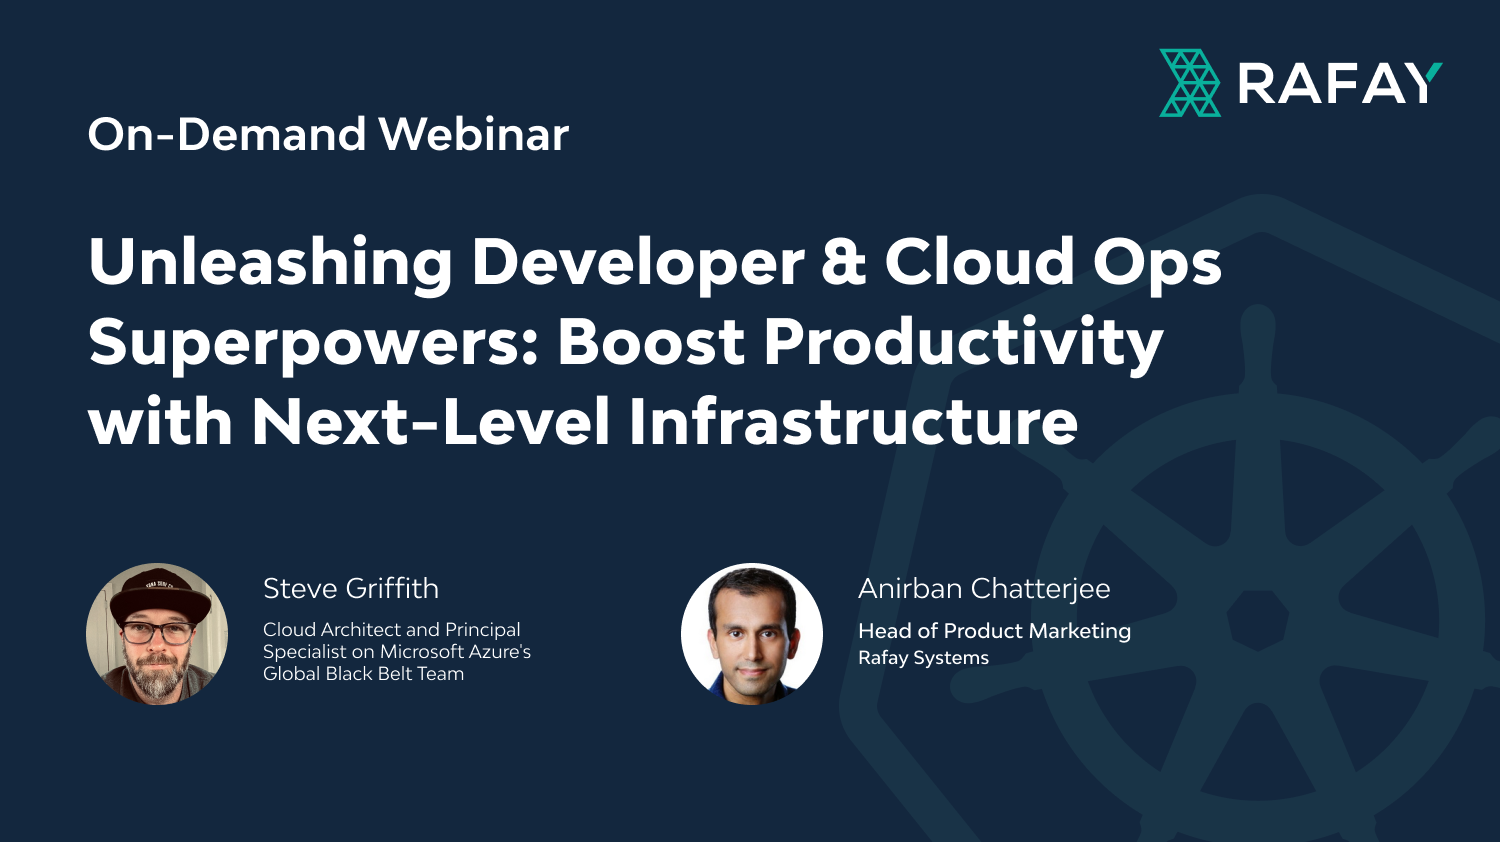 image for Unleashing Developer & Cloud Ops Superpowers: Boost Productivity with Next-Level Infrastructure